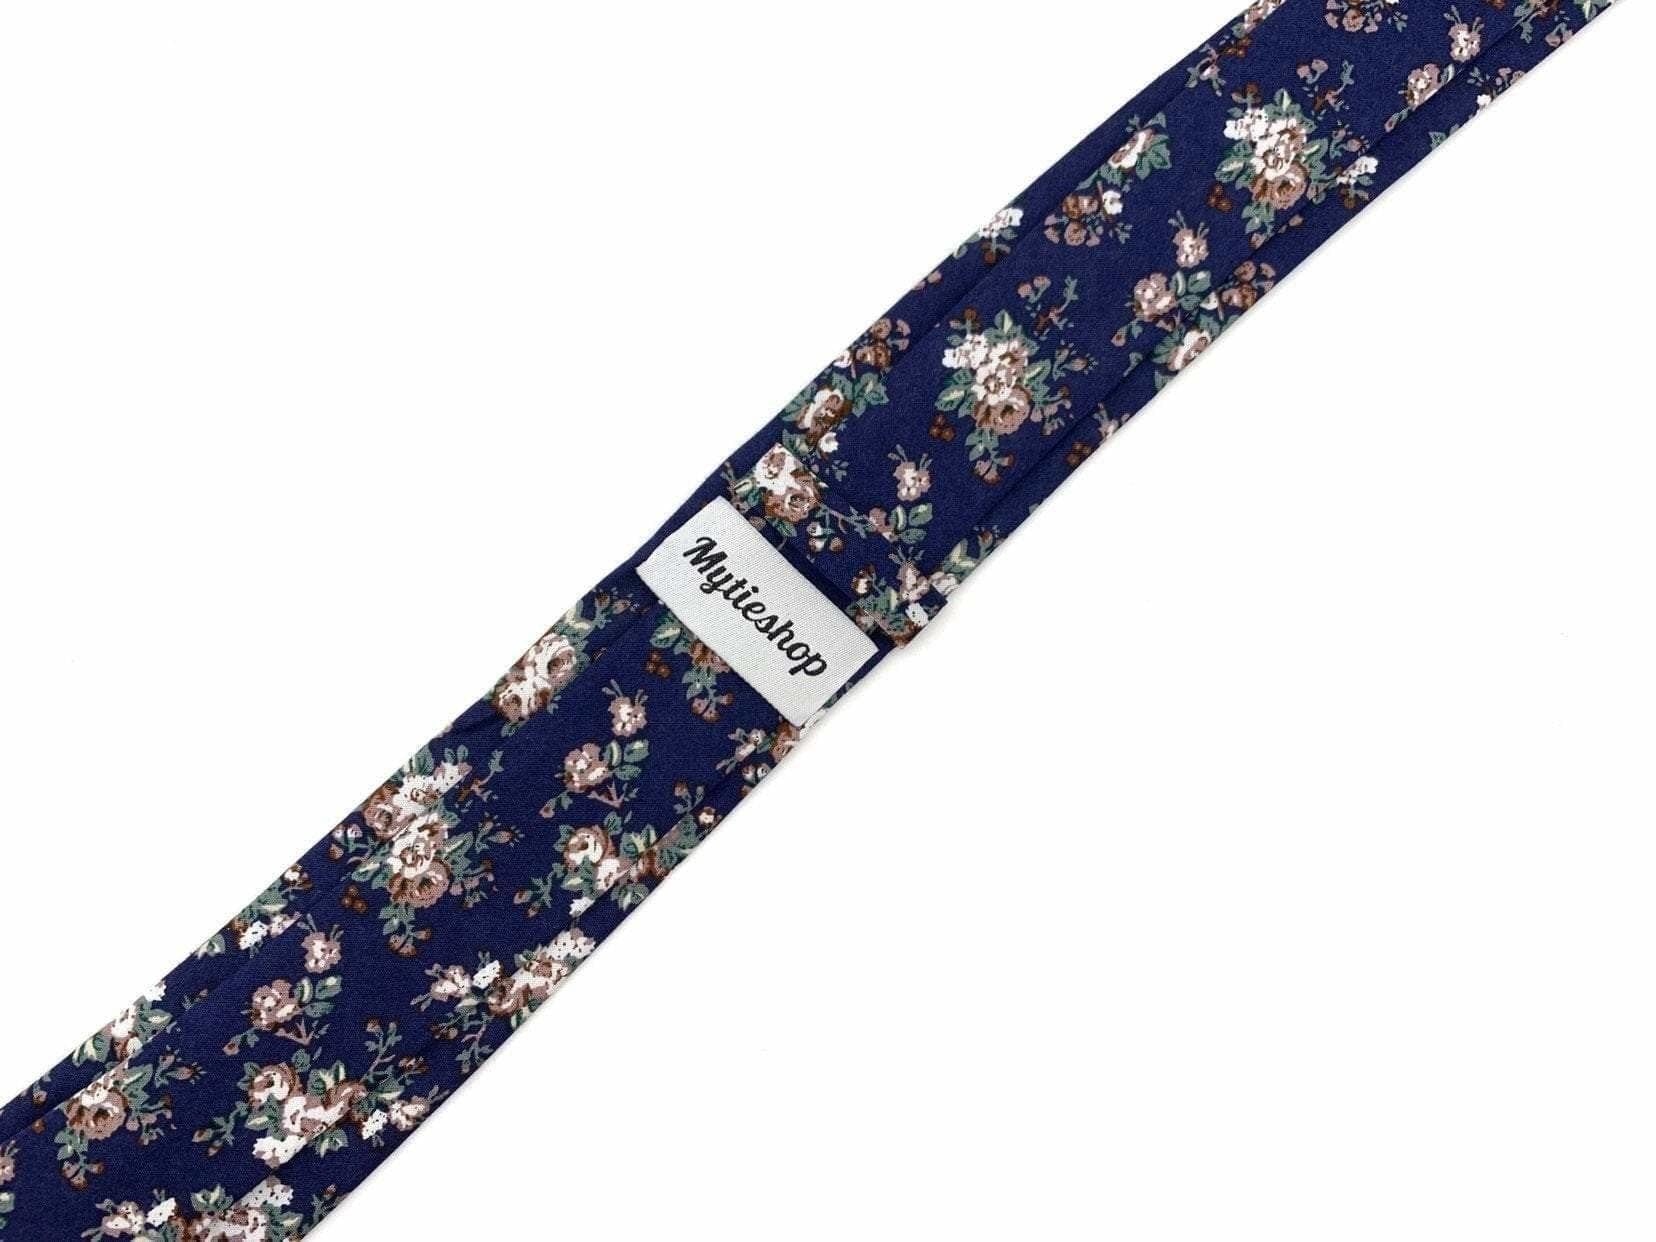 NAVY Floral Tie 2.36" LAKE - MYTIESHOP-Neckties-Navy Floral Skinny Tie Men’s Floral Necktie for weddings events, great for prom anniversary gifts. Groom groomsmen father of bride blue floral tie-Mytieshop. Skinny ties for weddings anniversaries. Father of bride. Groomsmen. Cool skinny neckties for men. Neckwear for prom, missions and fancy events. Gift ideas for men. Anniversaries ideas. Wedding aesthetics. Flower ties. Dry flower ties.